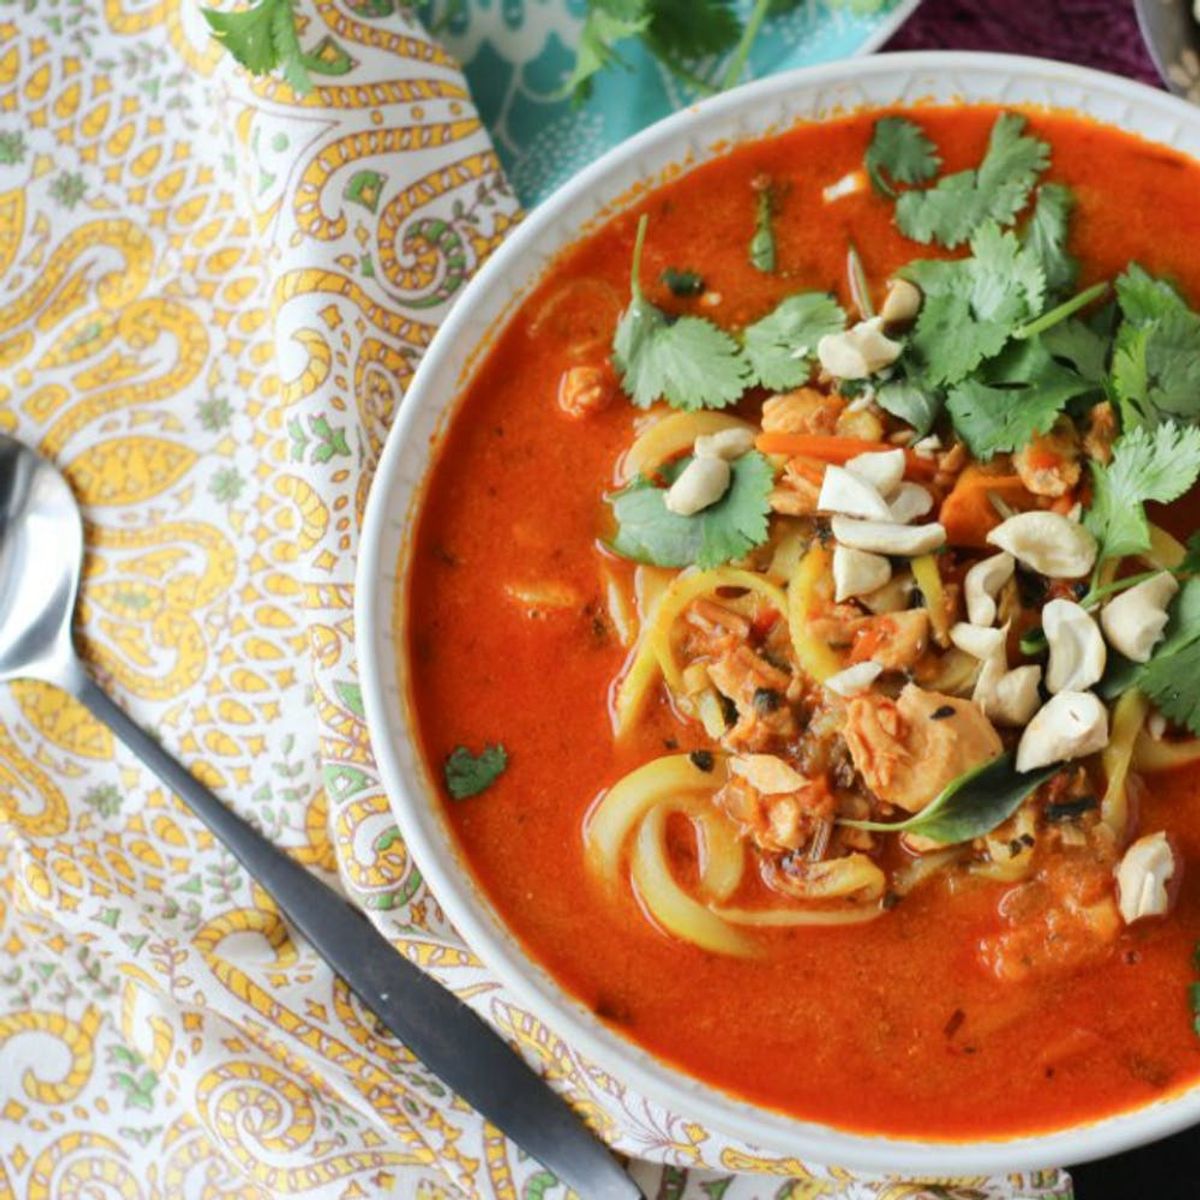 16 Tasty Whole30 Recipes That Cook Up Quickly in a Pressure Cooker or Instant Pot